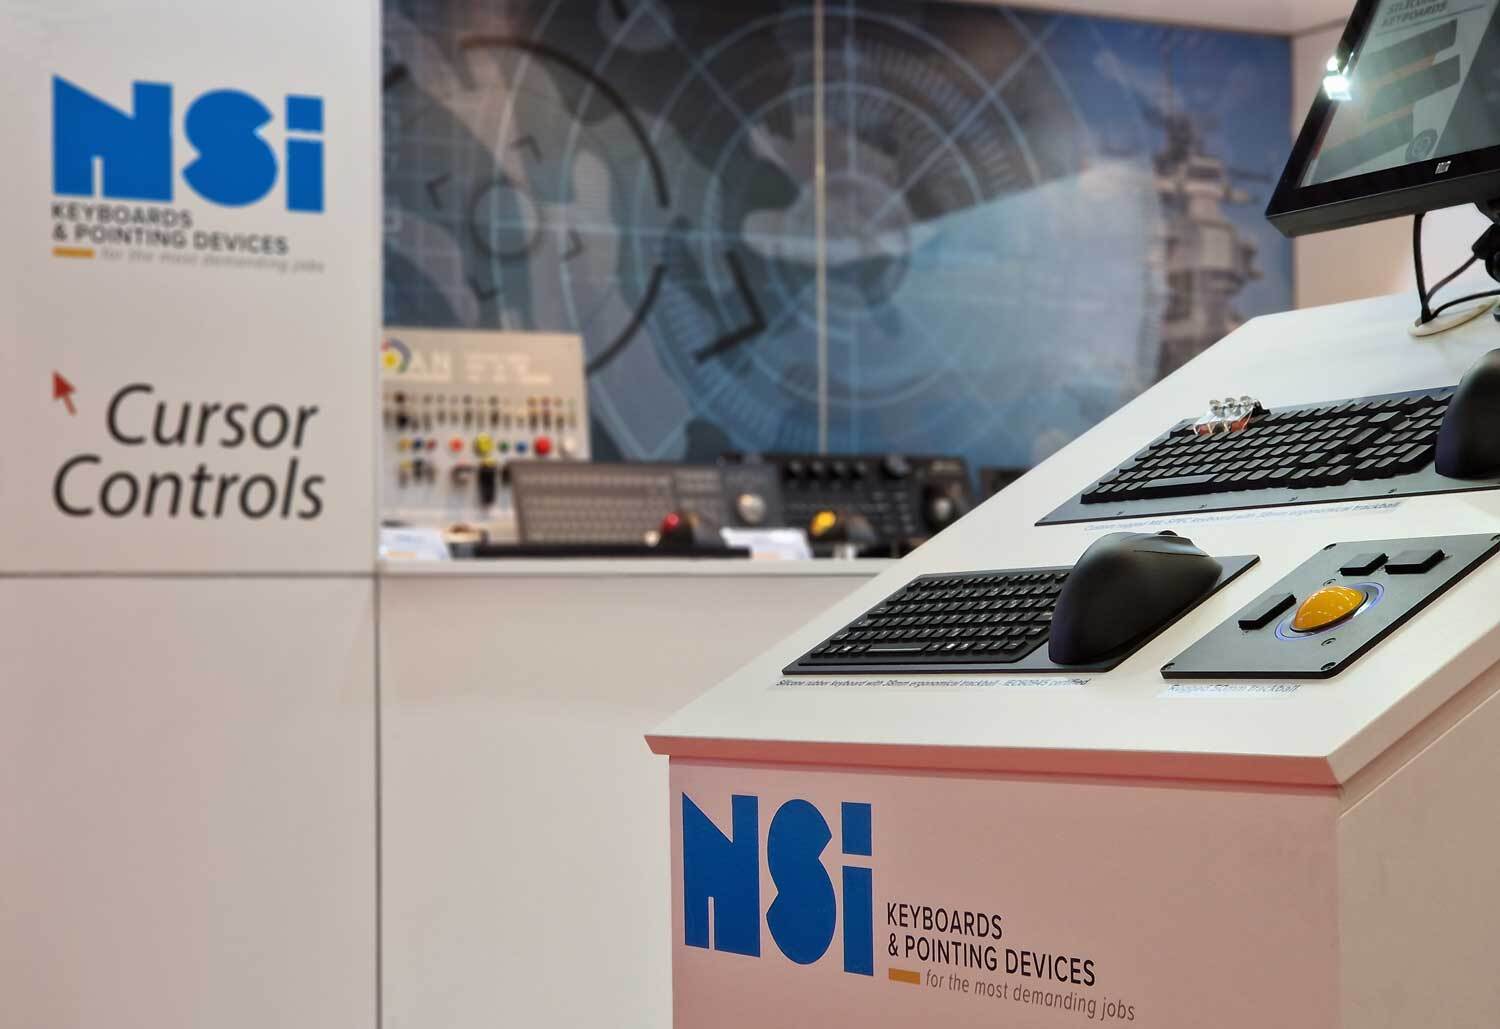 NSI Keyboards and pointing devices exhibition booth